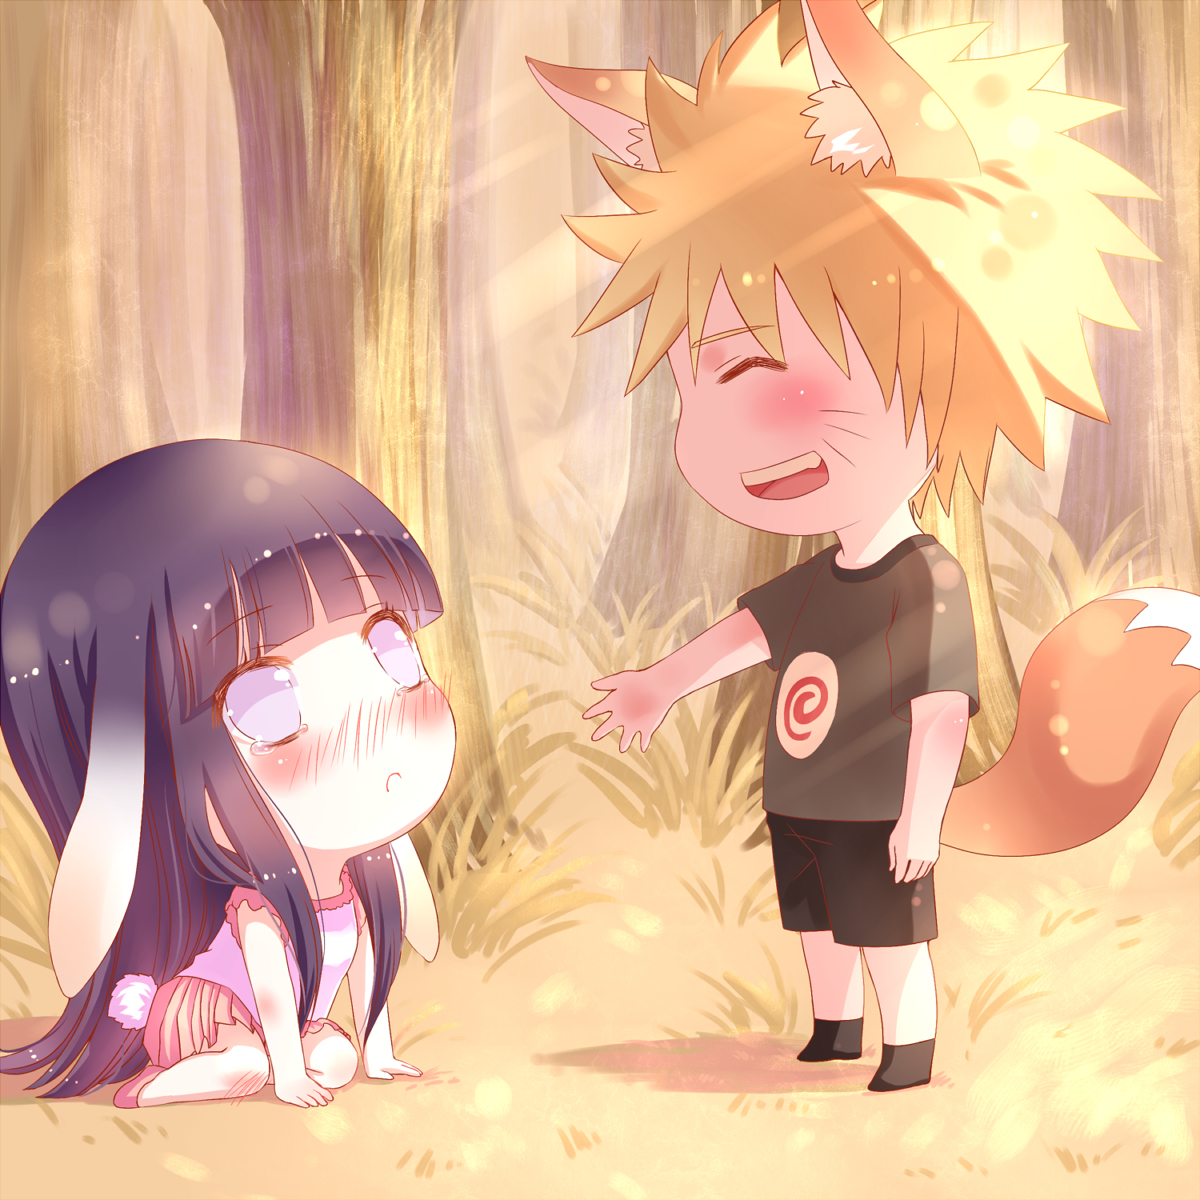 The Servant of Love Chapter 14, a naruto fanfic | FanFiction